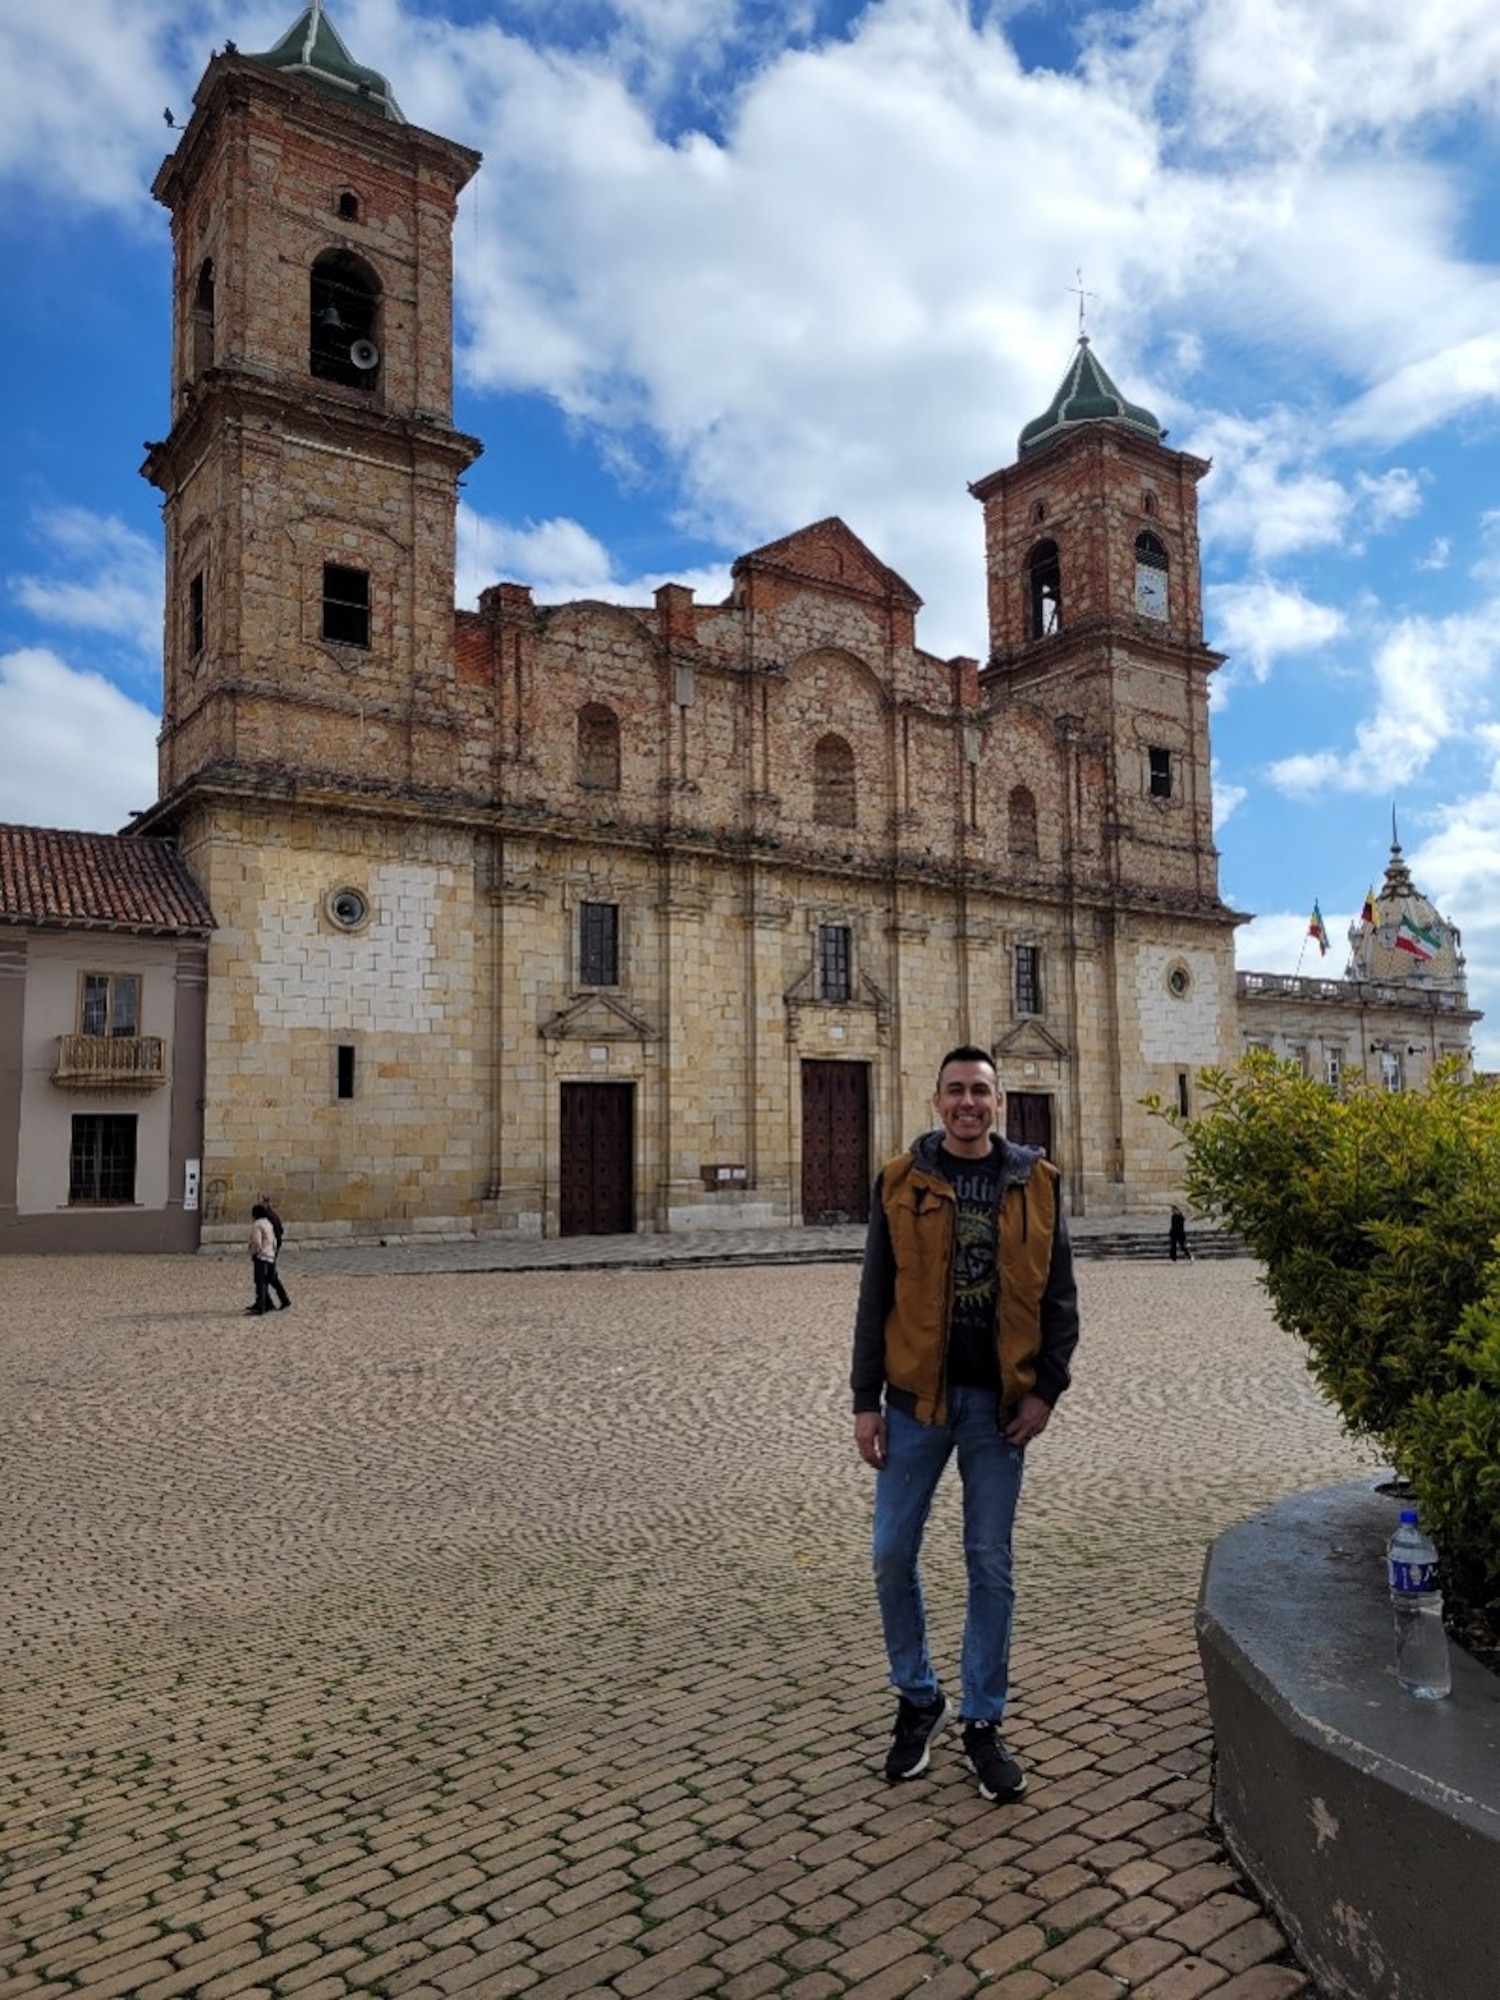 Spanish Language Enabled Airman Program Scholar Maj. Oscar Castro visited historic sites during his Language Intensive Training Event in Colombia.